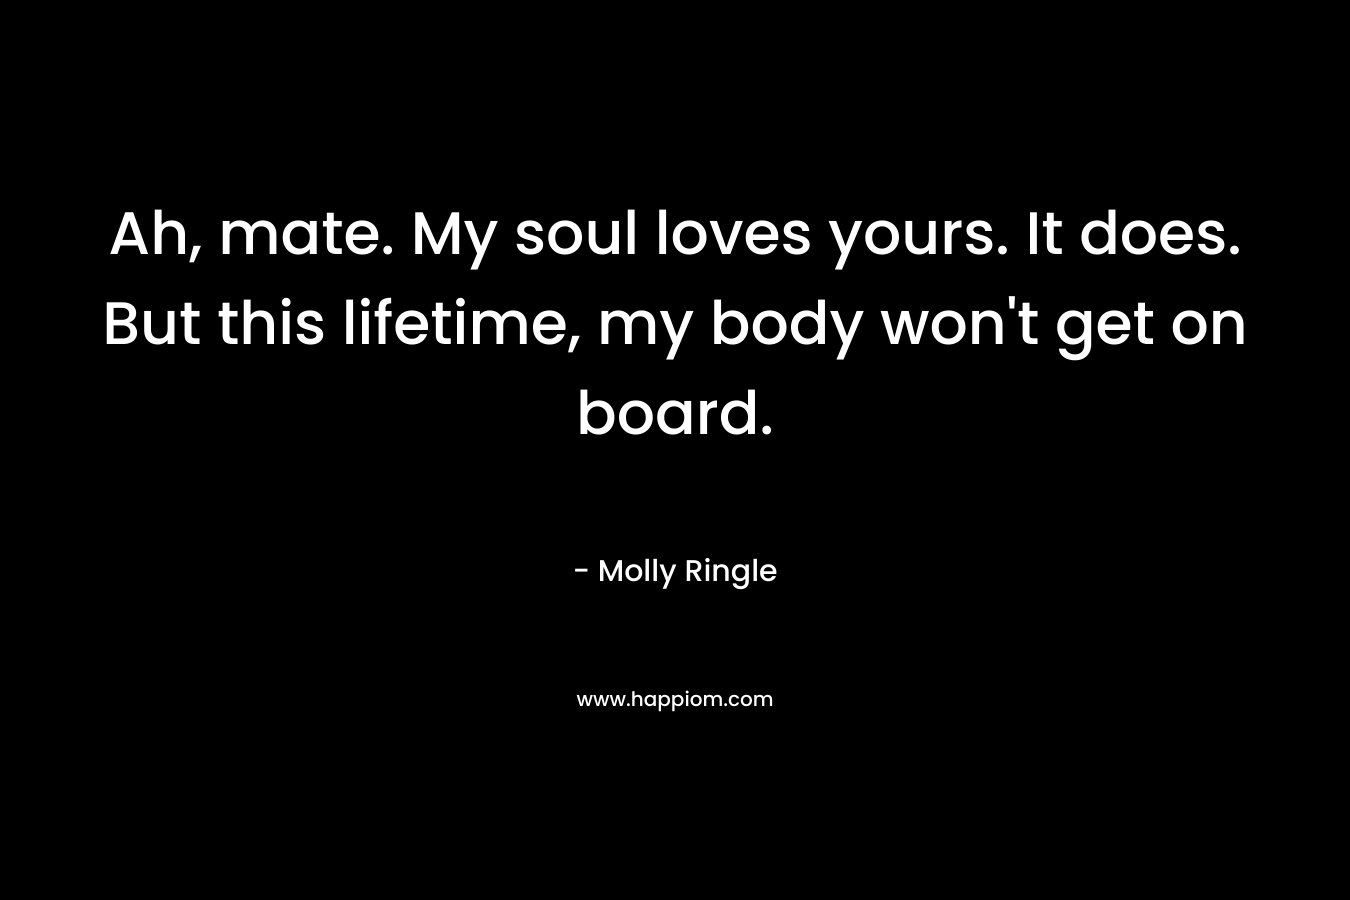 Ah, mate. My soul loves yours. It does. But this lifetime, my body won't get on board.